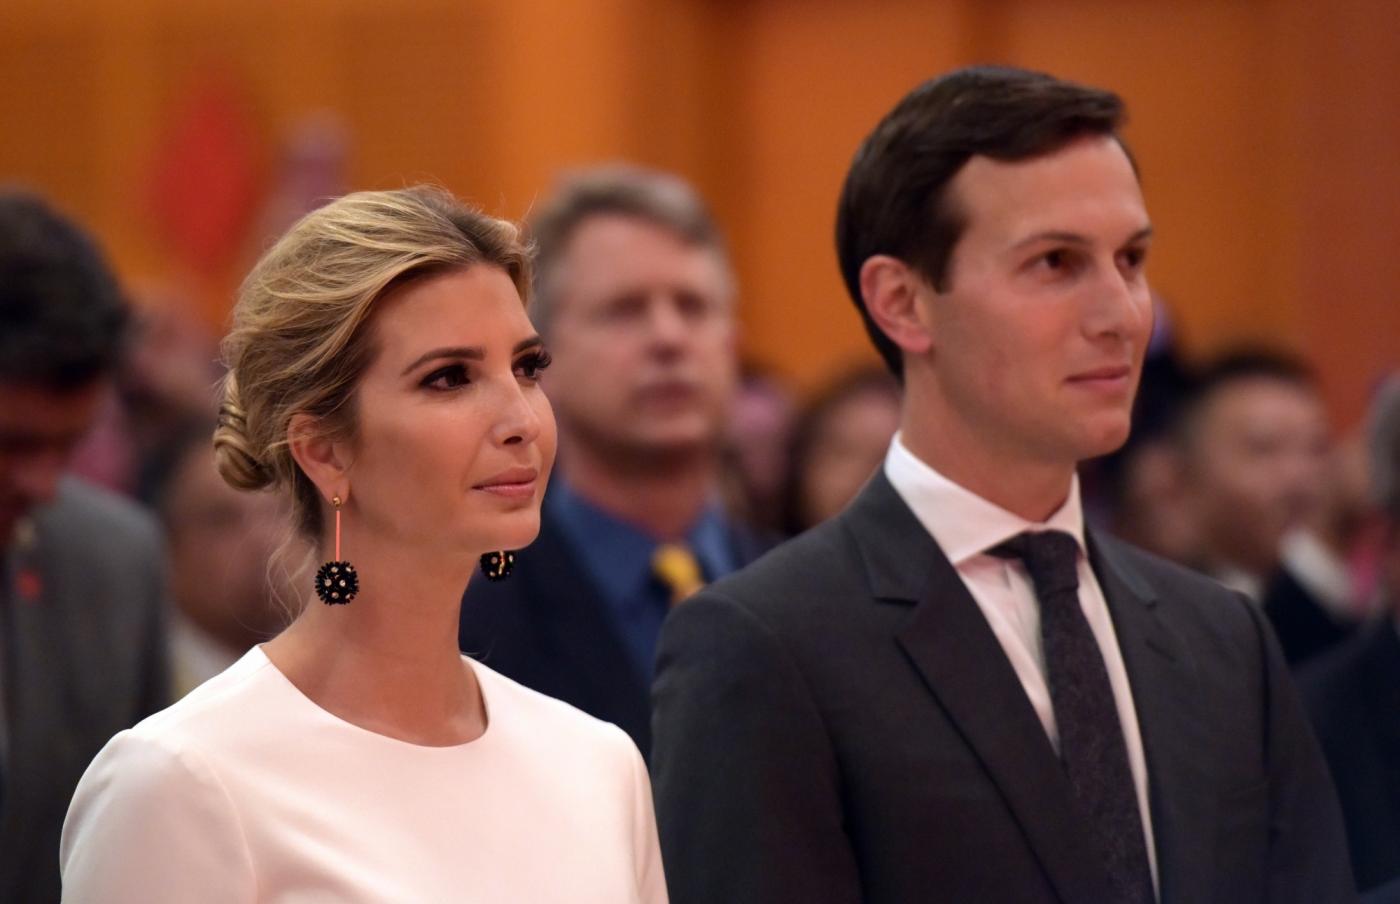 WASHINGTON D.C., Sept. 28, 2017 (Xinhua) -- Ivanka Trump (L) and her husband Jared Kushner, White House senior adviser, attend the National Day reception held by the Chinese Embassy in Washington D.C. Sept. 27, 2017. (Xinhua/Yin Bogu/IANS) by .